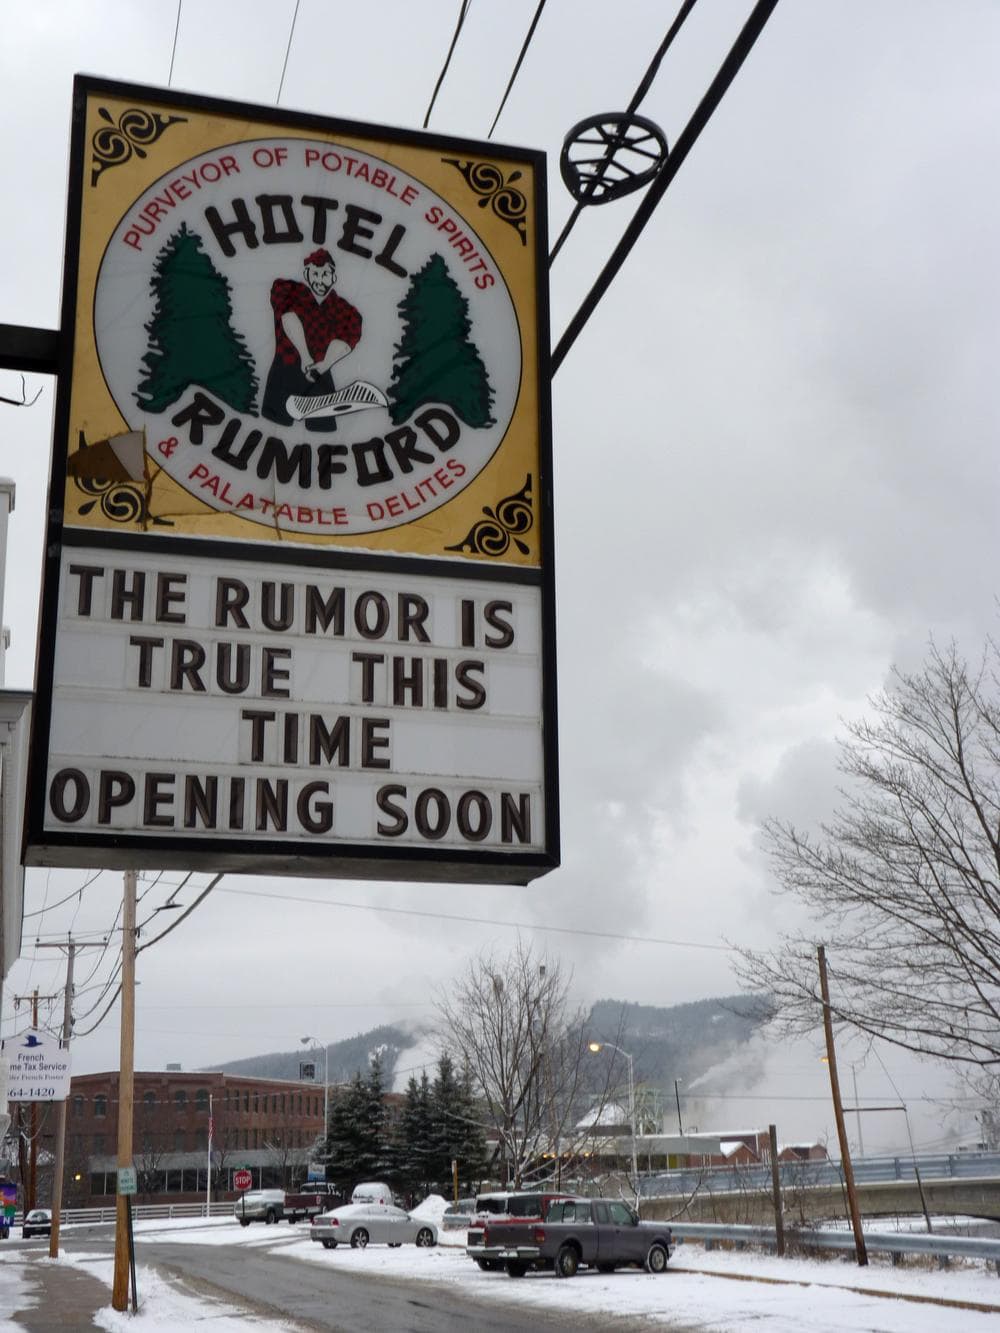 This downtown hotel hopes to re-open next year to take advantage of the business that races bring to town. (Sam Evans-Brown)